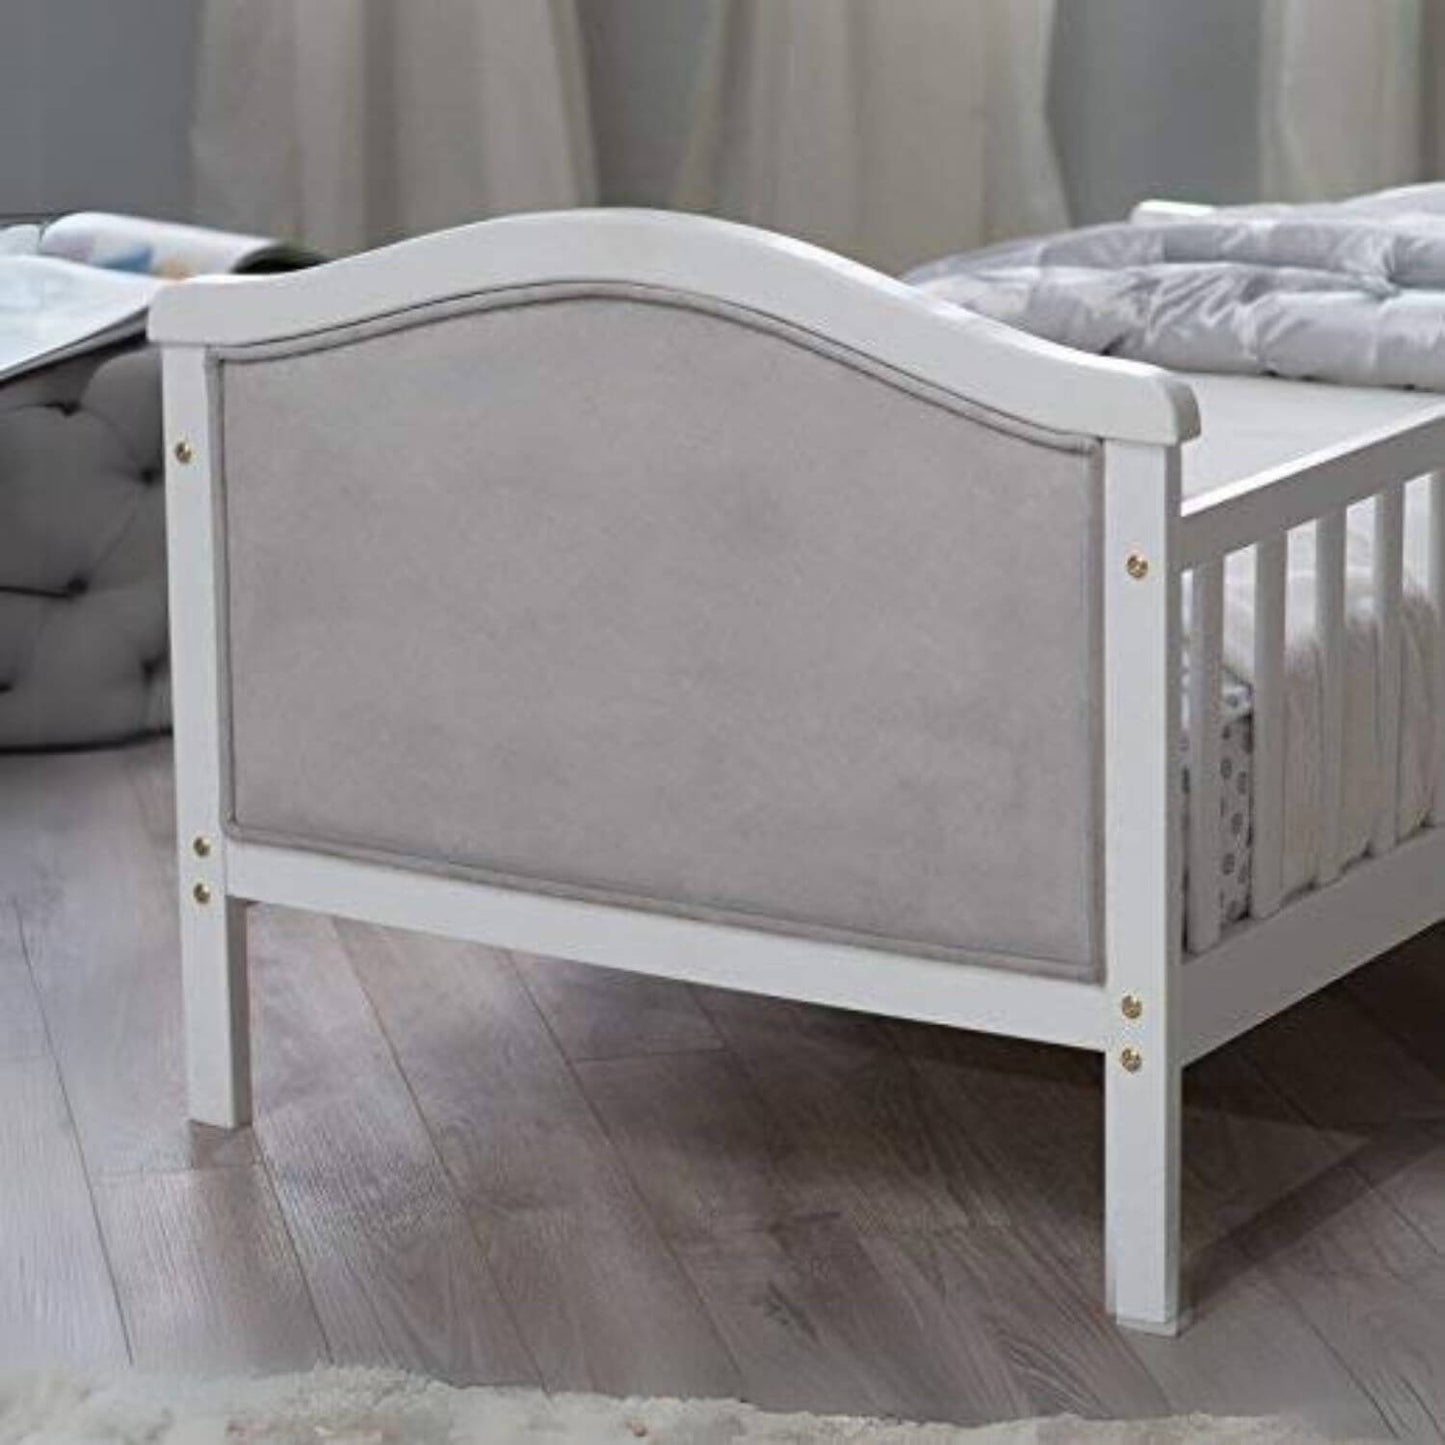 Orbelle French White Padded Gray Toddler Bed - Detail